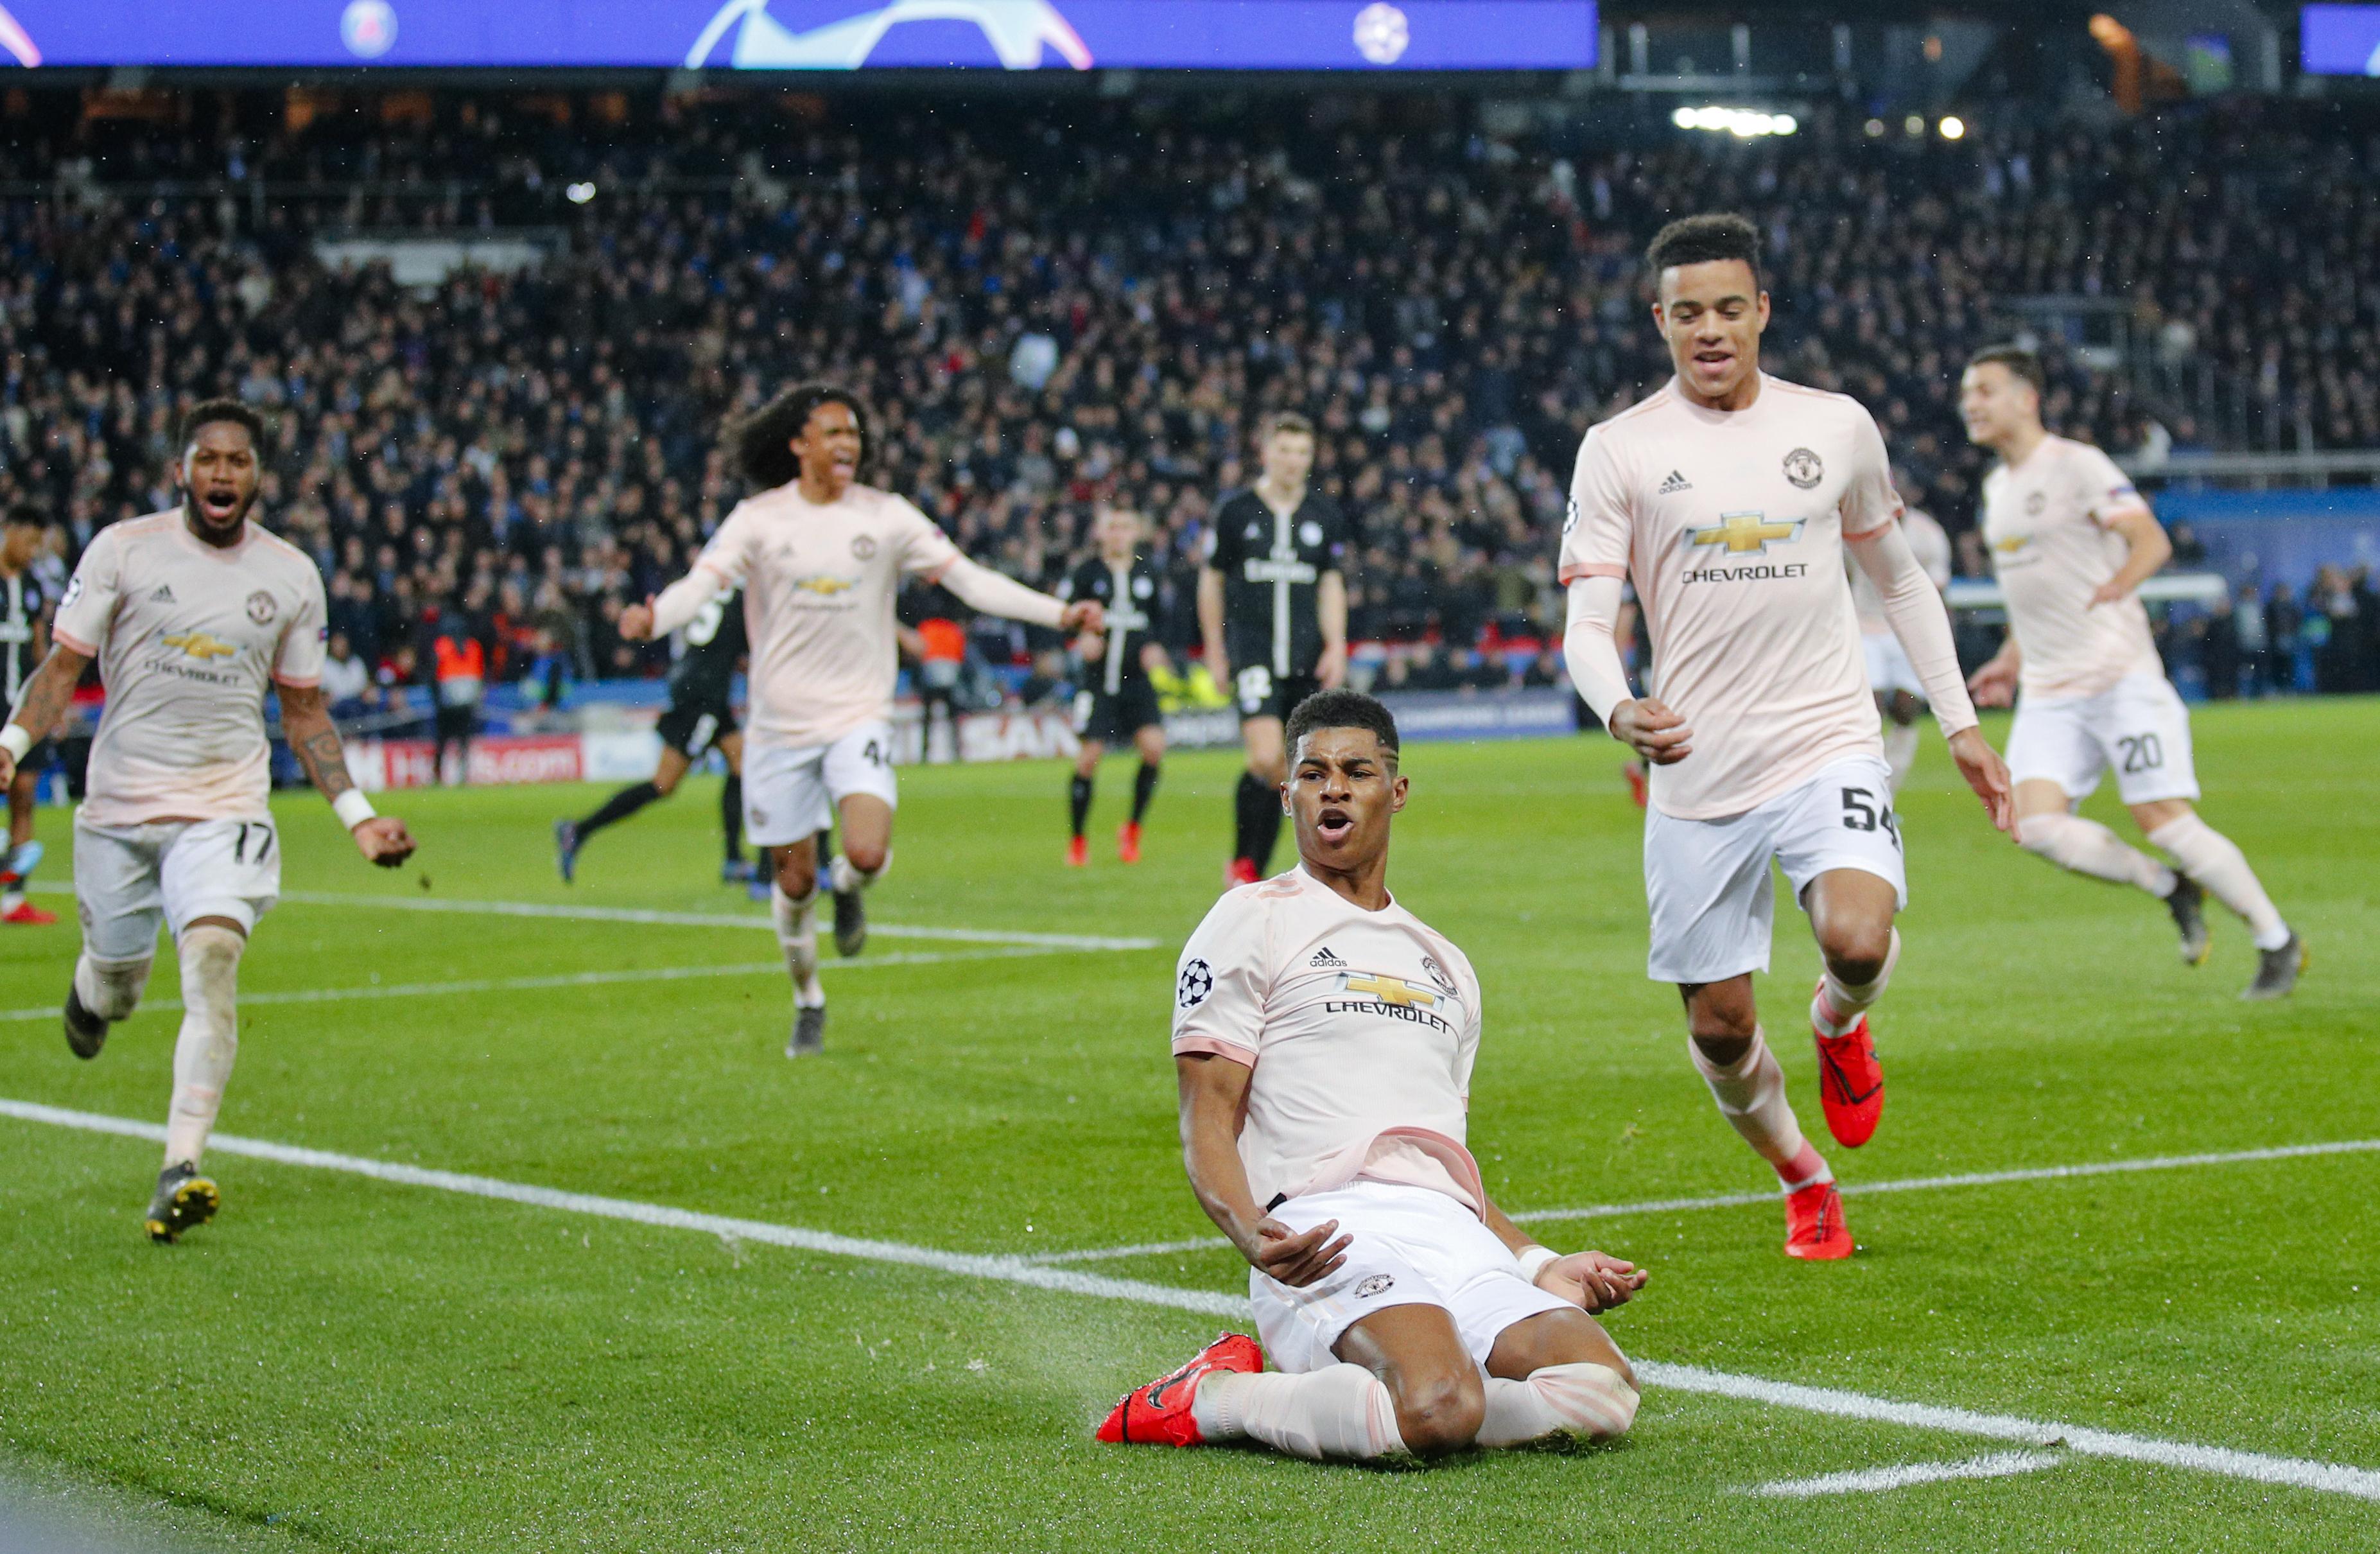 Ole Gunnar Solskjaer leads United to another late CL win as PSG falters